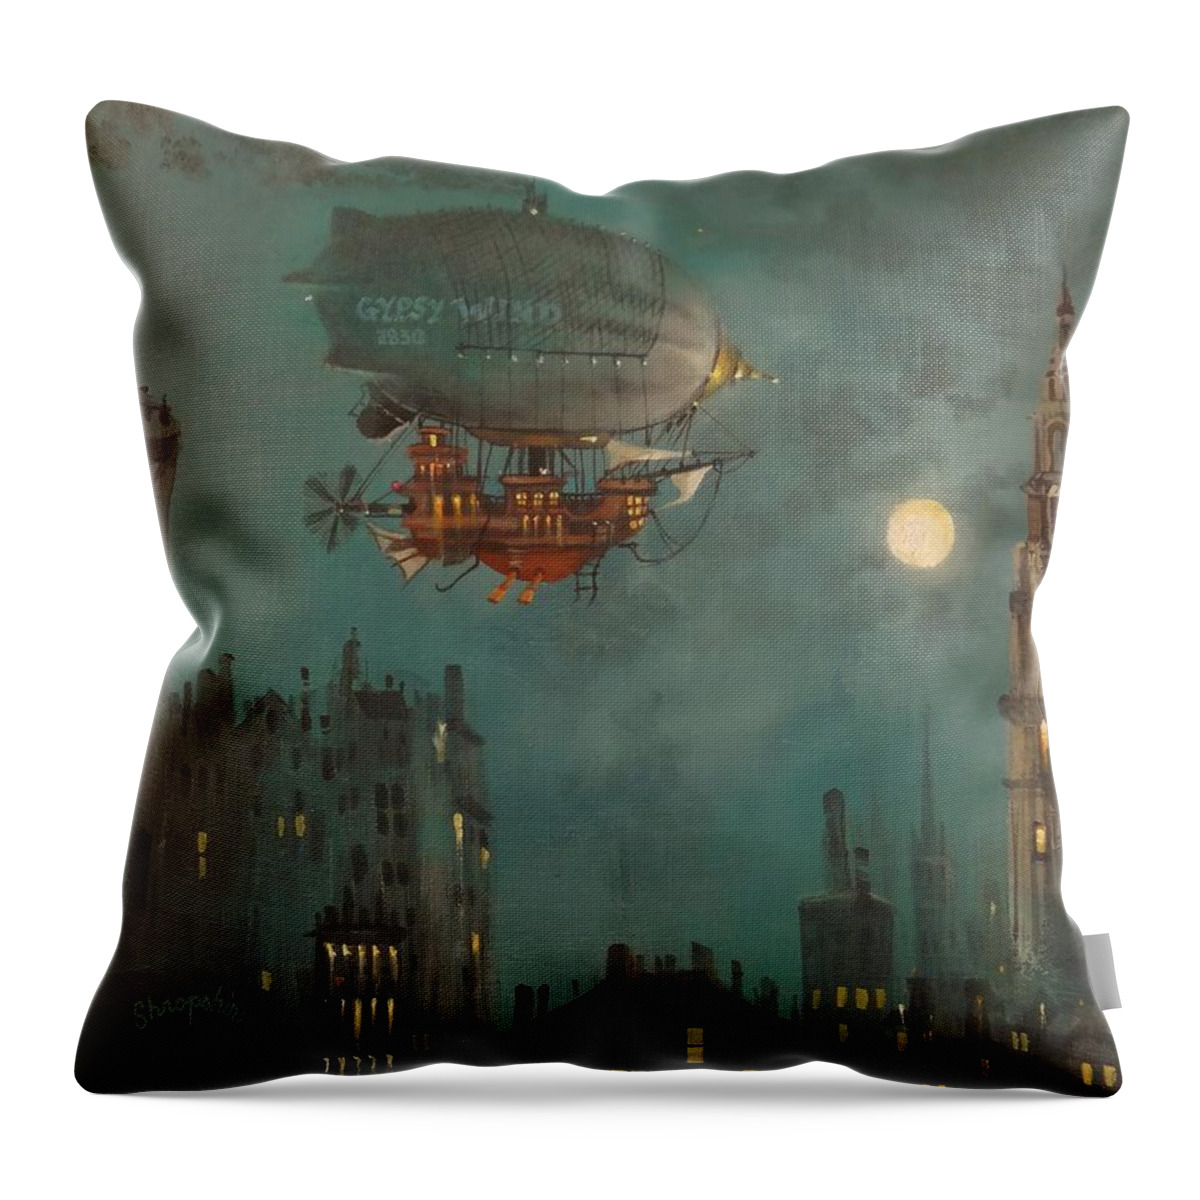 Airship Throw Pillow featuring the painting Airship by Moonlight by Tom Shropshire